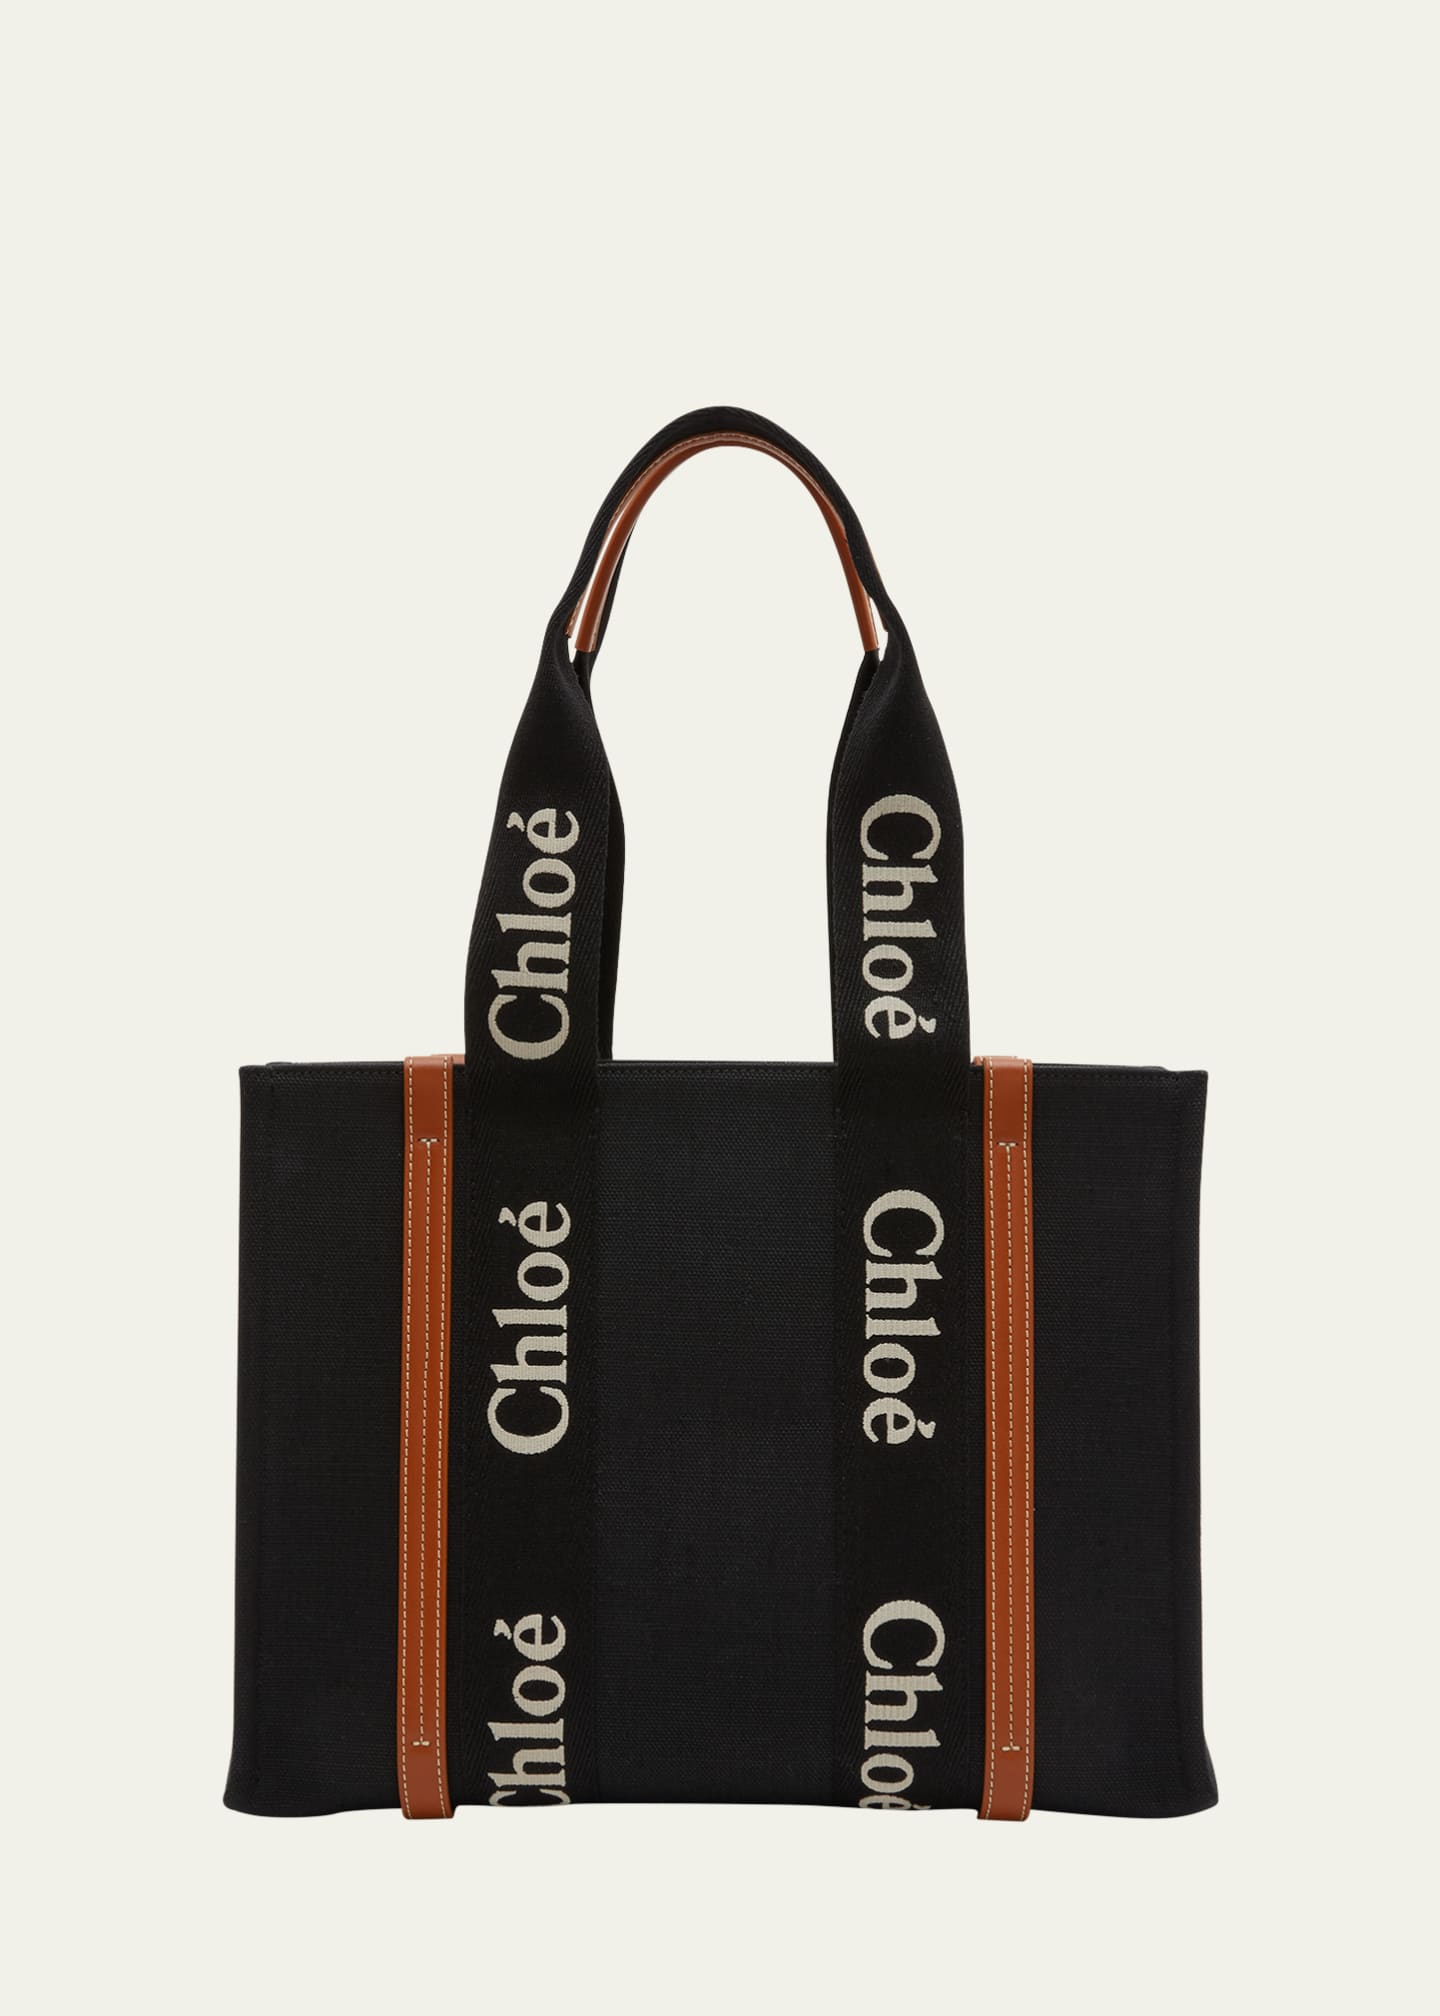 Chloe Woody Medium Linen and Leather Tote Bag